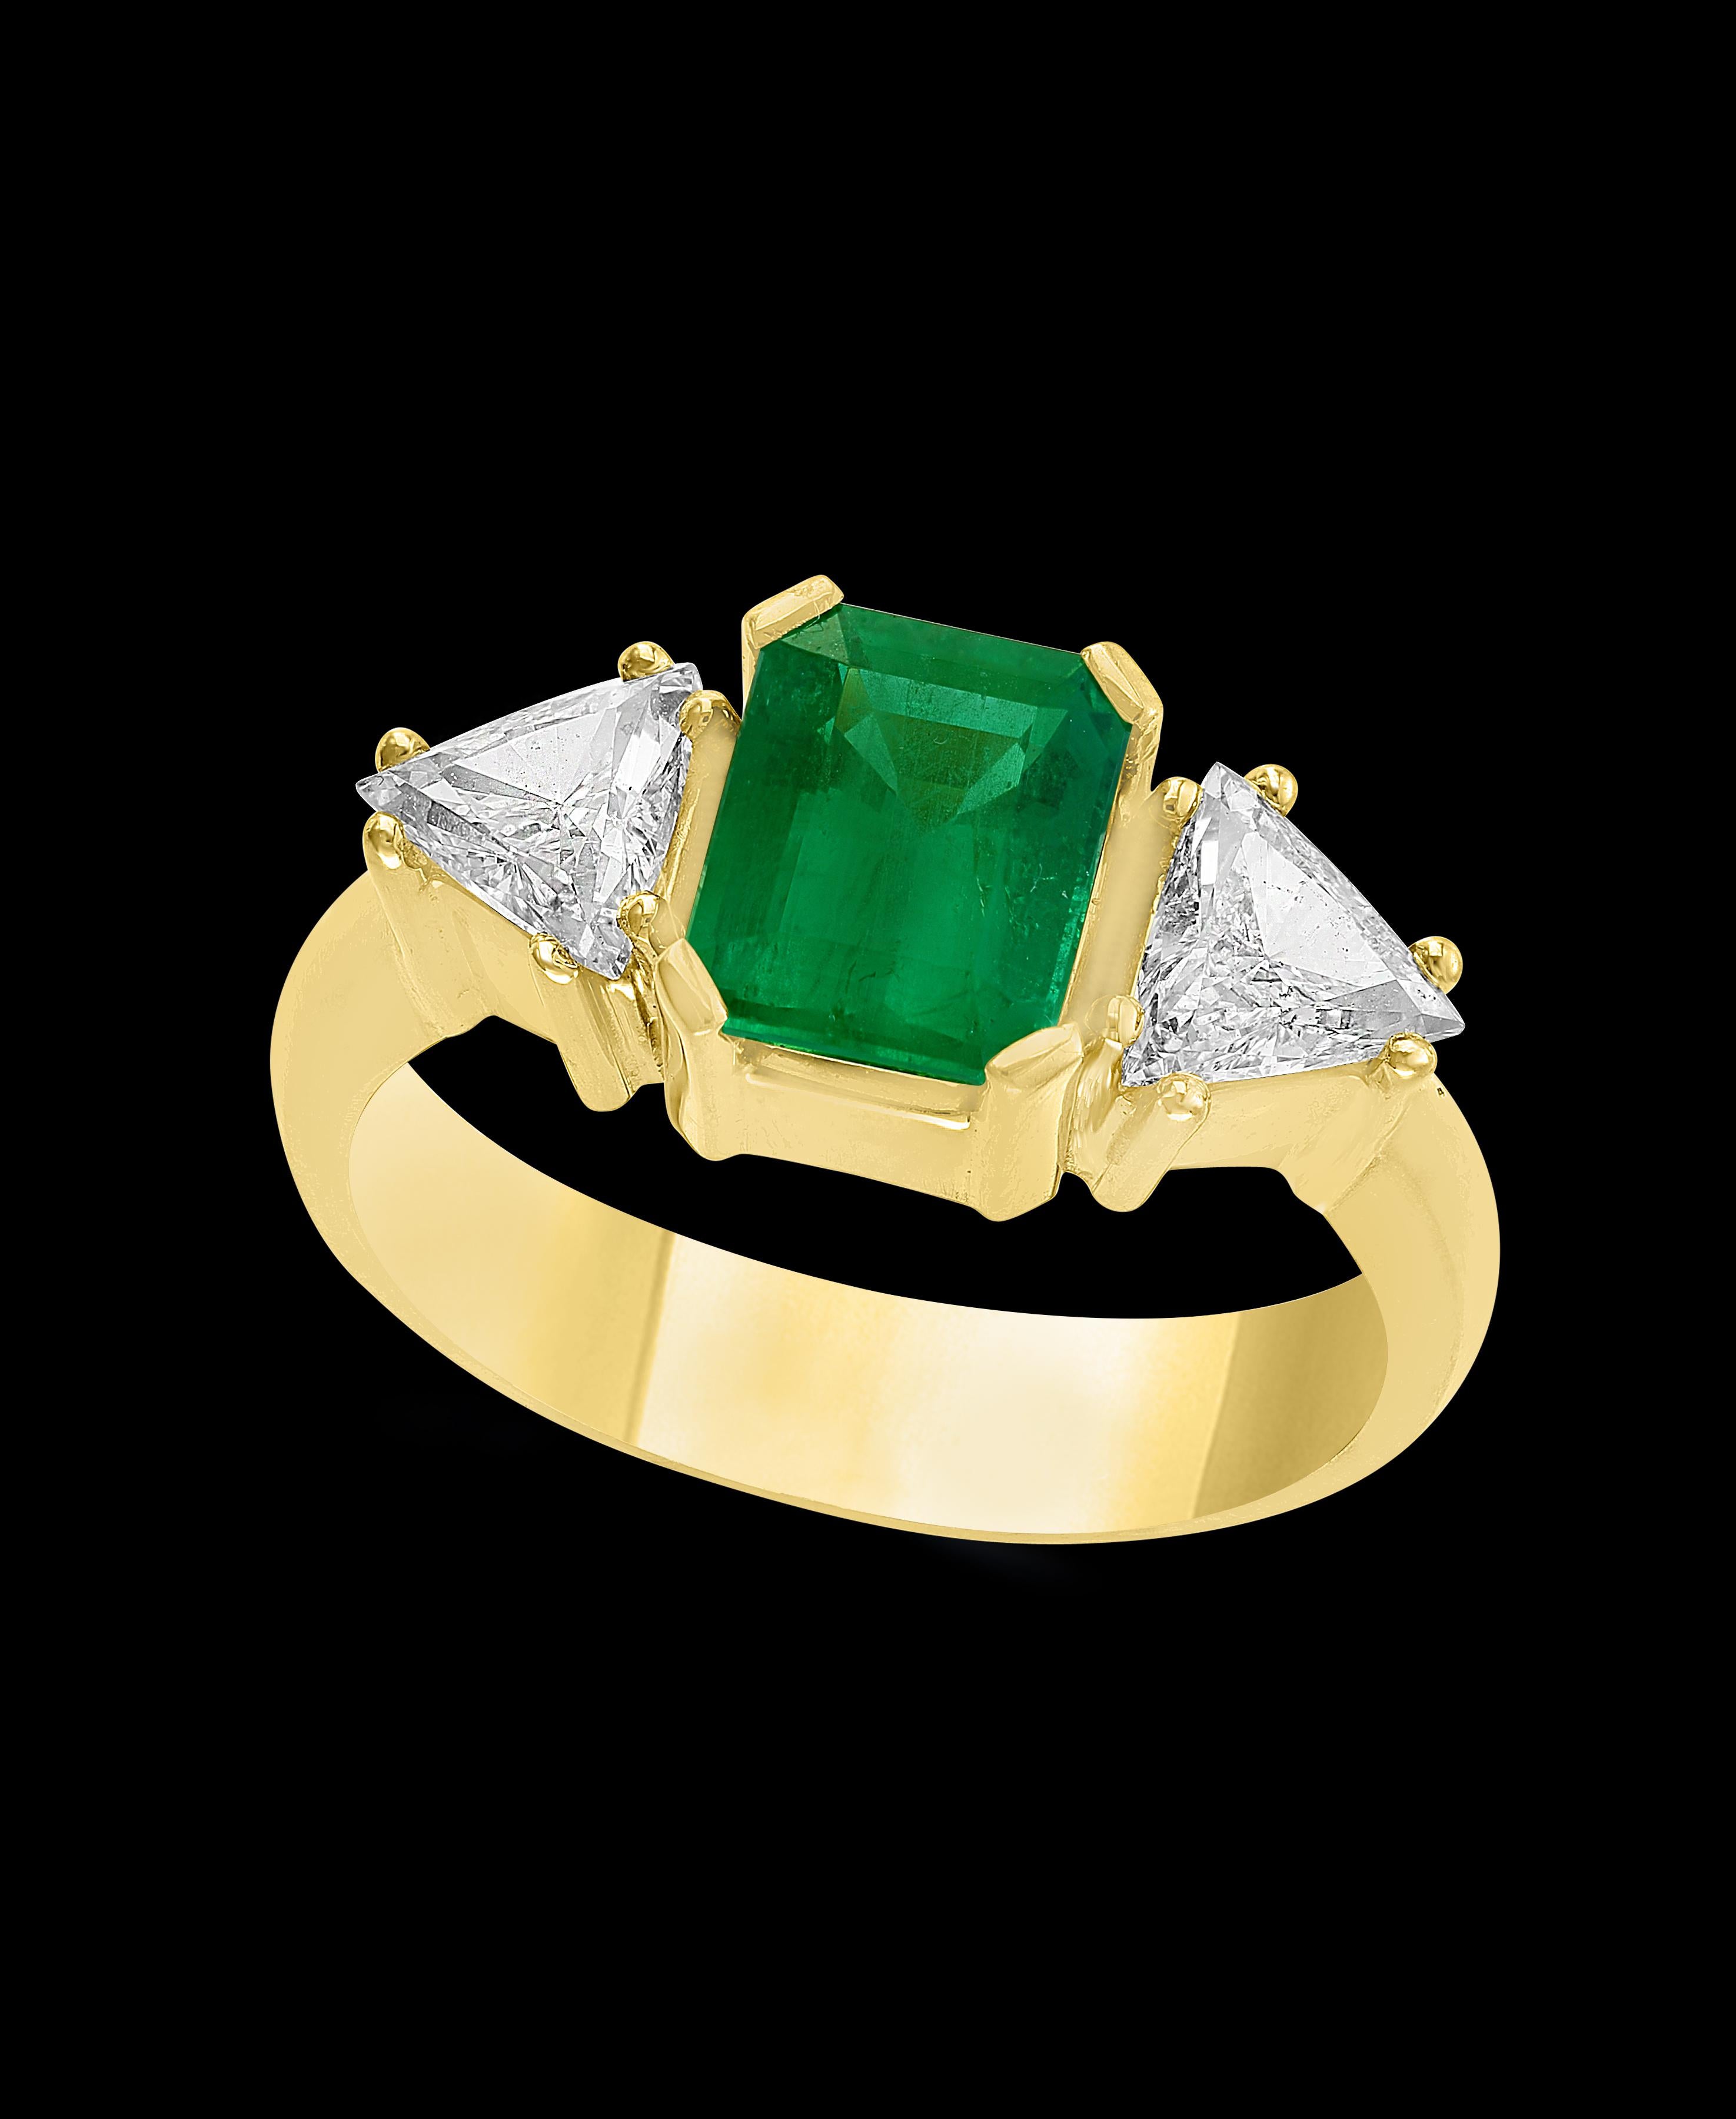 AGL Certified  Insignificant to Minor Traditional  Emerald Cut  Emerald and Diamond Ring 18K Gold
A classic, Cocktail ring 
Approximately 2 Carat  Brazilian  Emerald and Diamond Ring, Estate.
AGL ( American Gemology Institute) known as the best